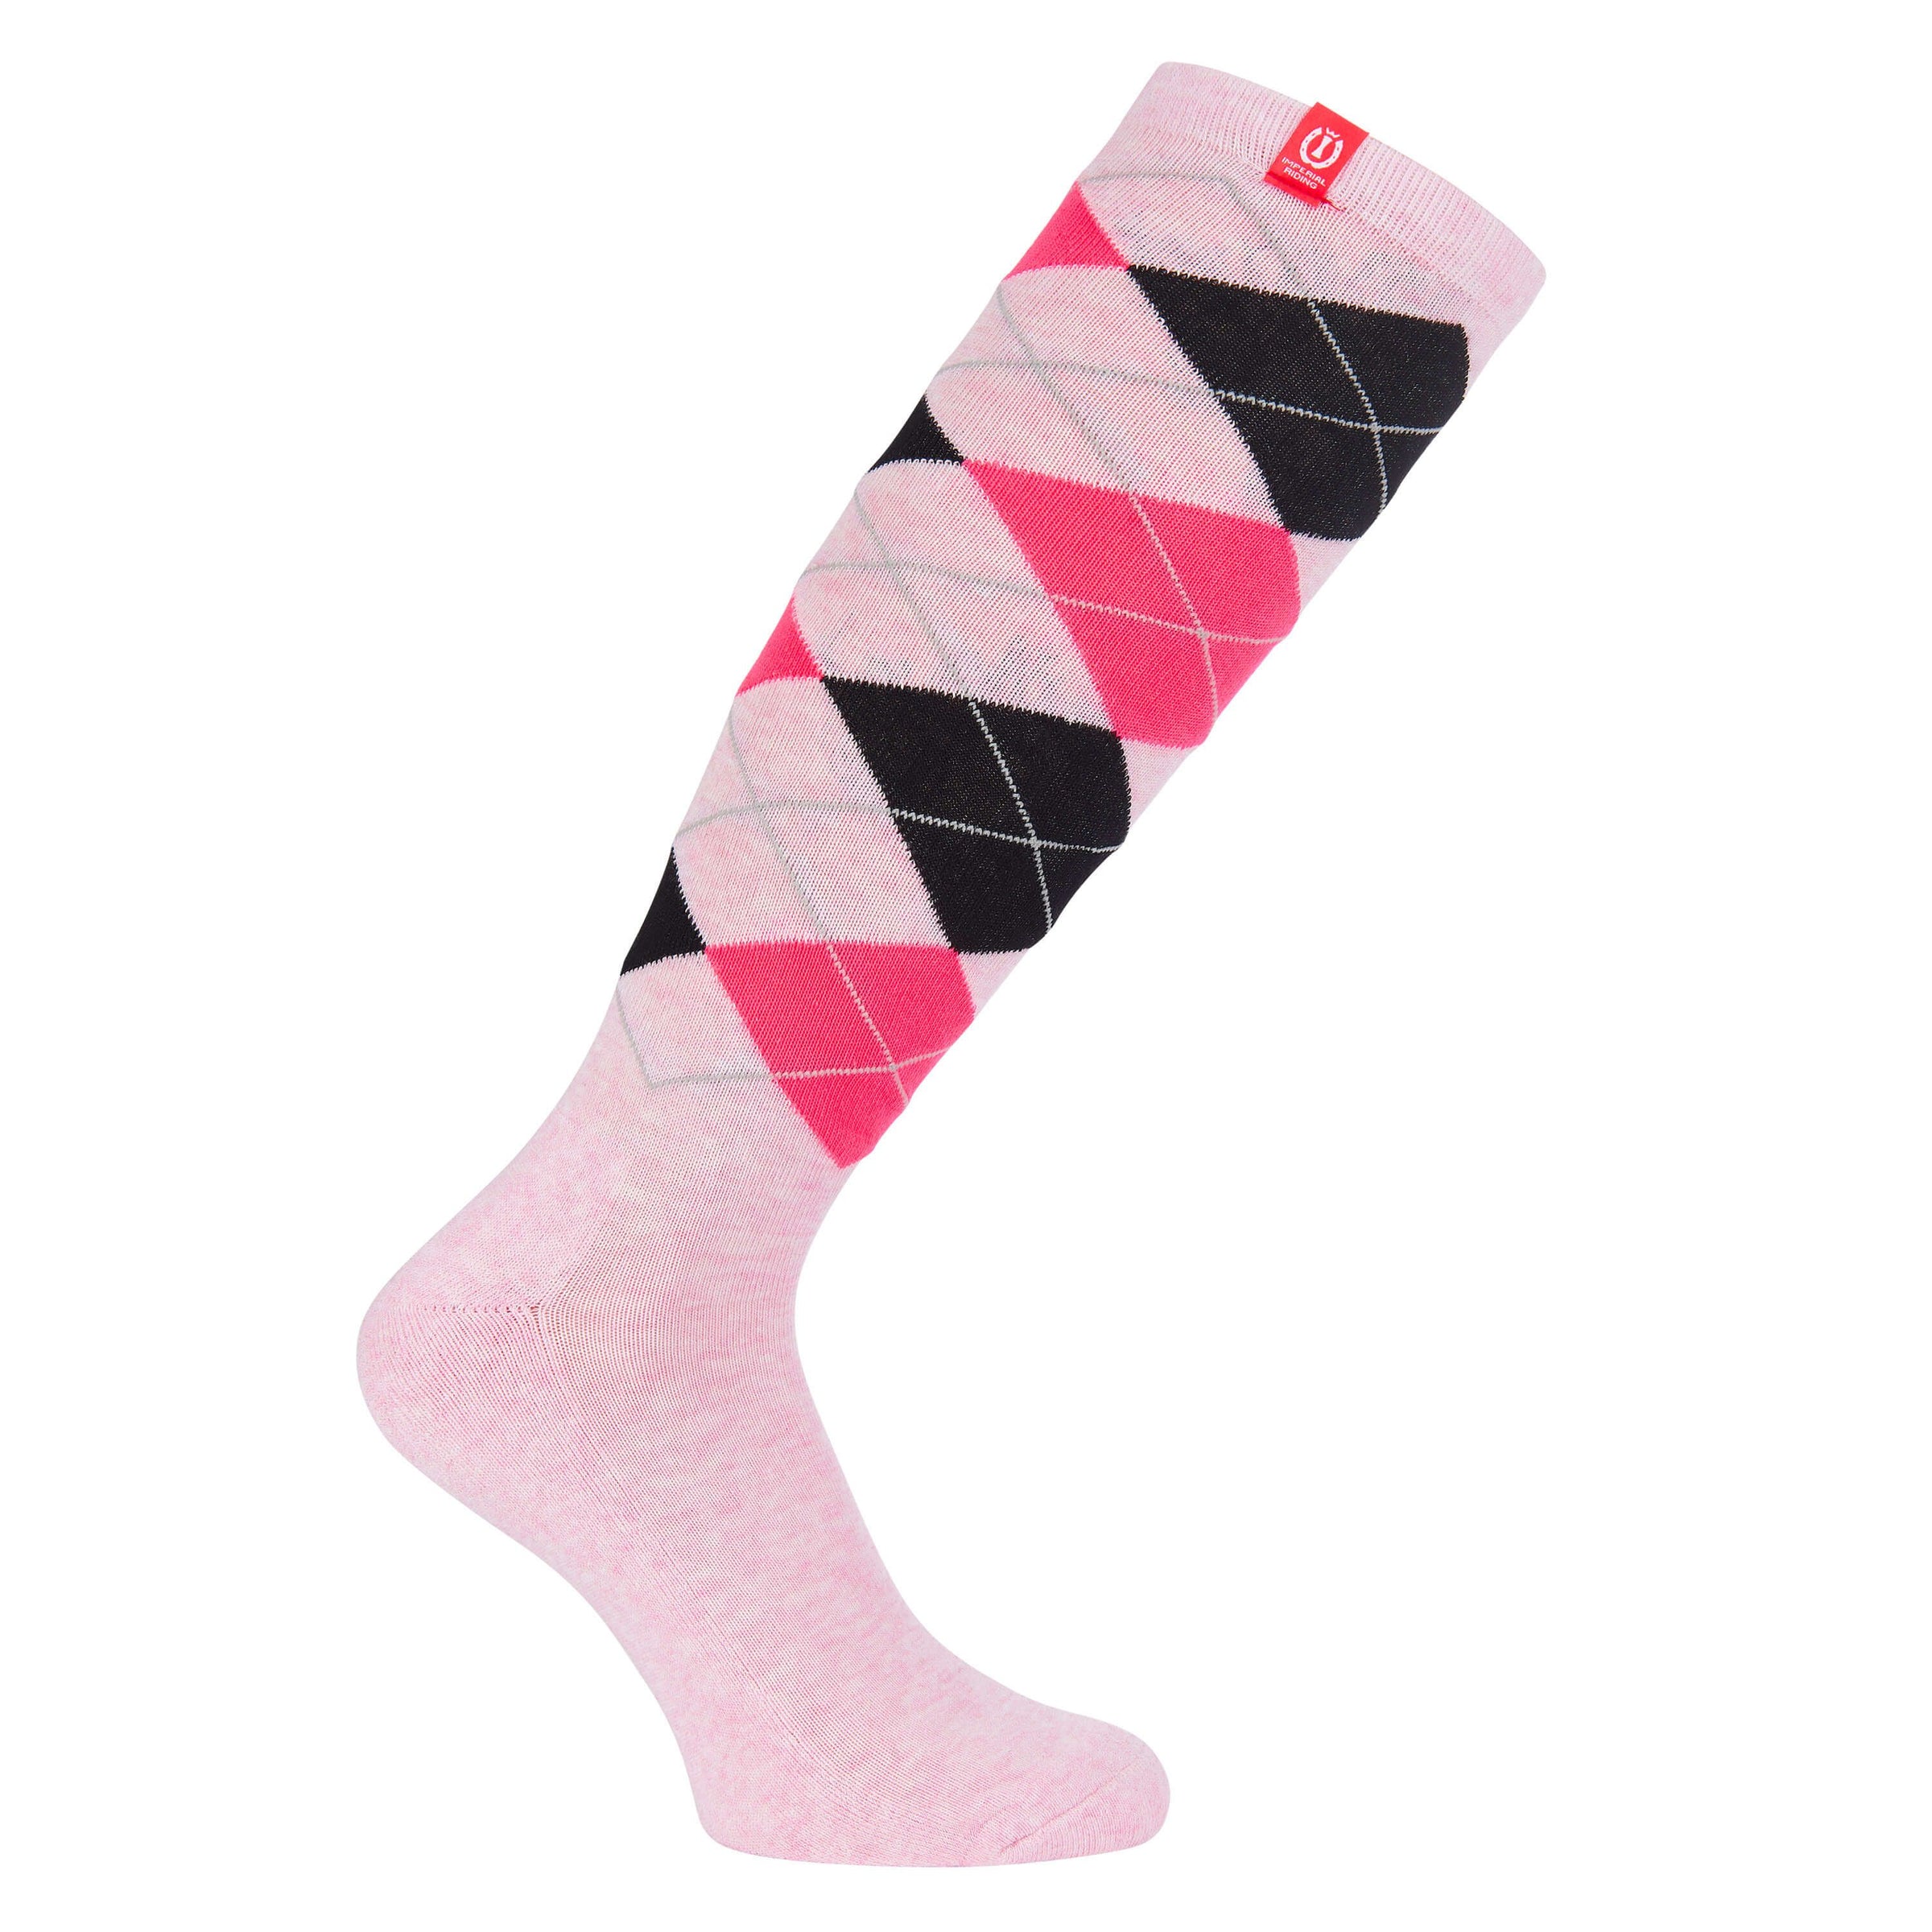 Imperial riding criss cross Rose gold riding socks